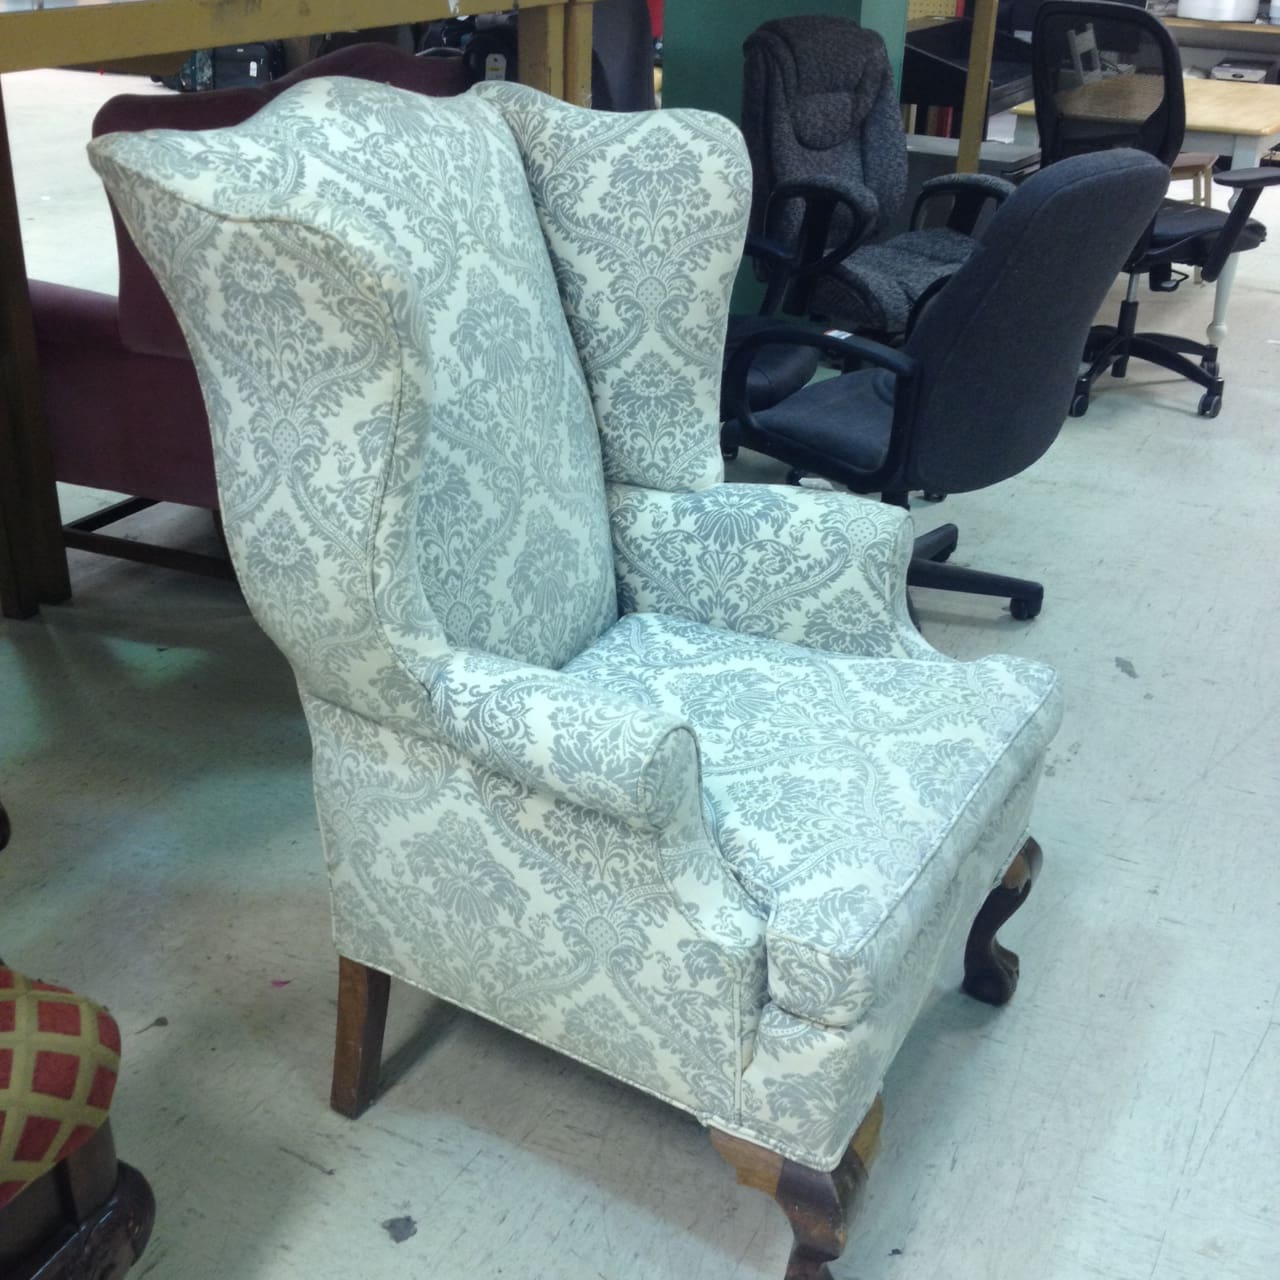 How To Reupholster A Wingback Chair, Cost To Recover Wingback Chair Uk